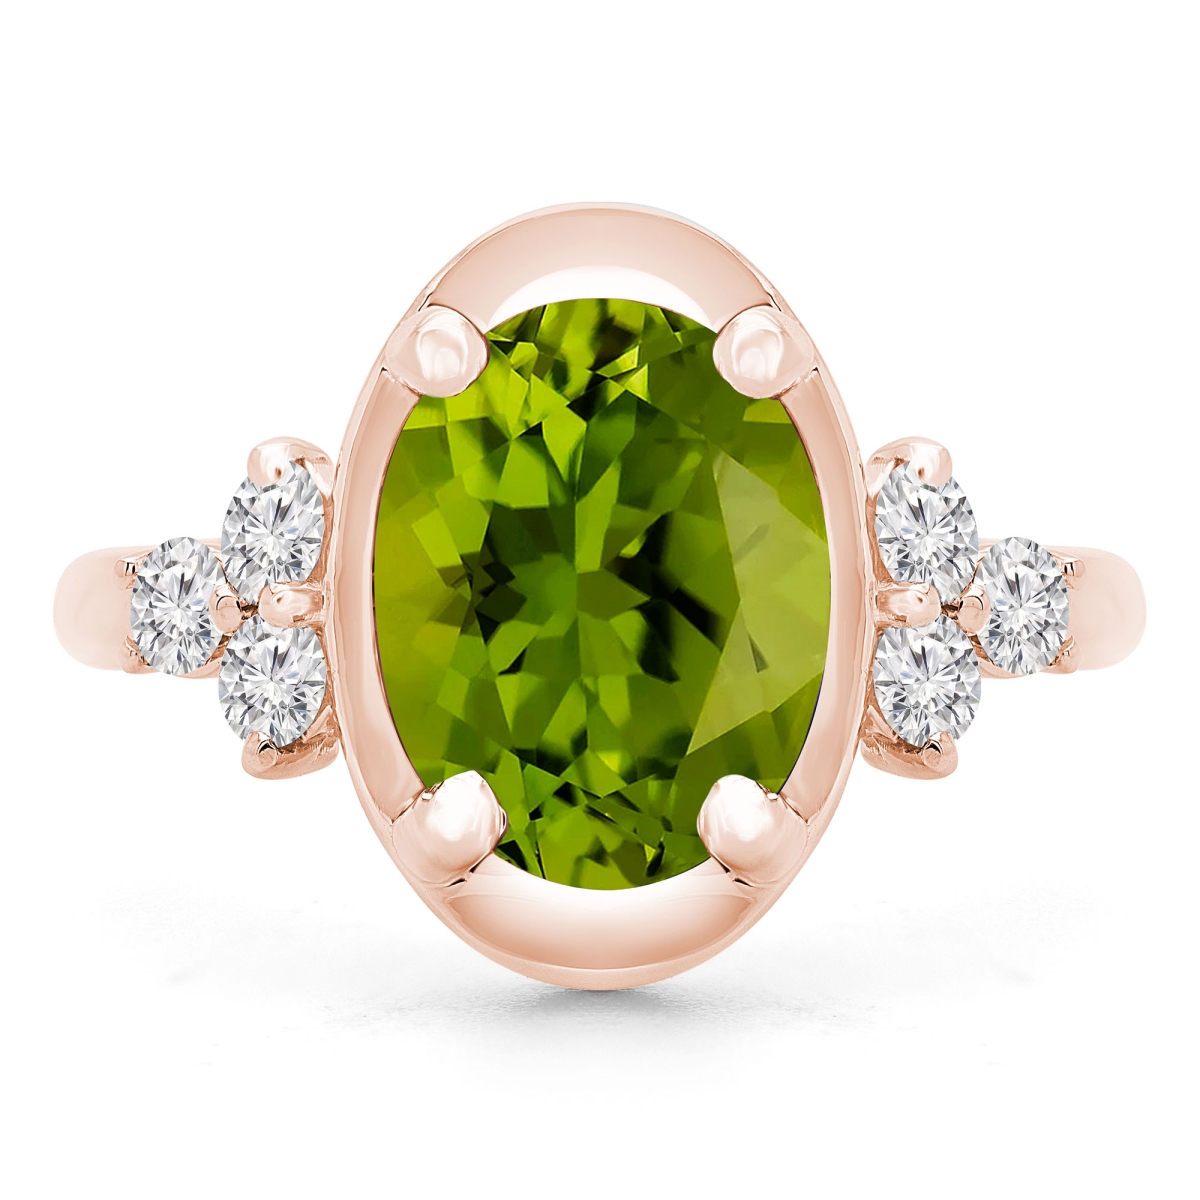 Picture of Majesty Diamonds MD190412-9 3.9 CTW Oval Green Peridot Cocktail Ring in 14K Rose Gold - Size 9